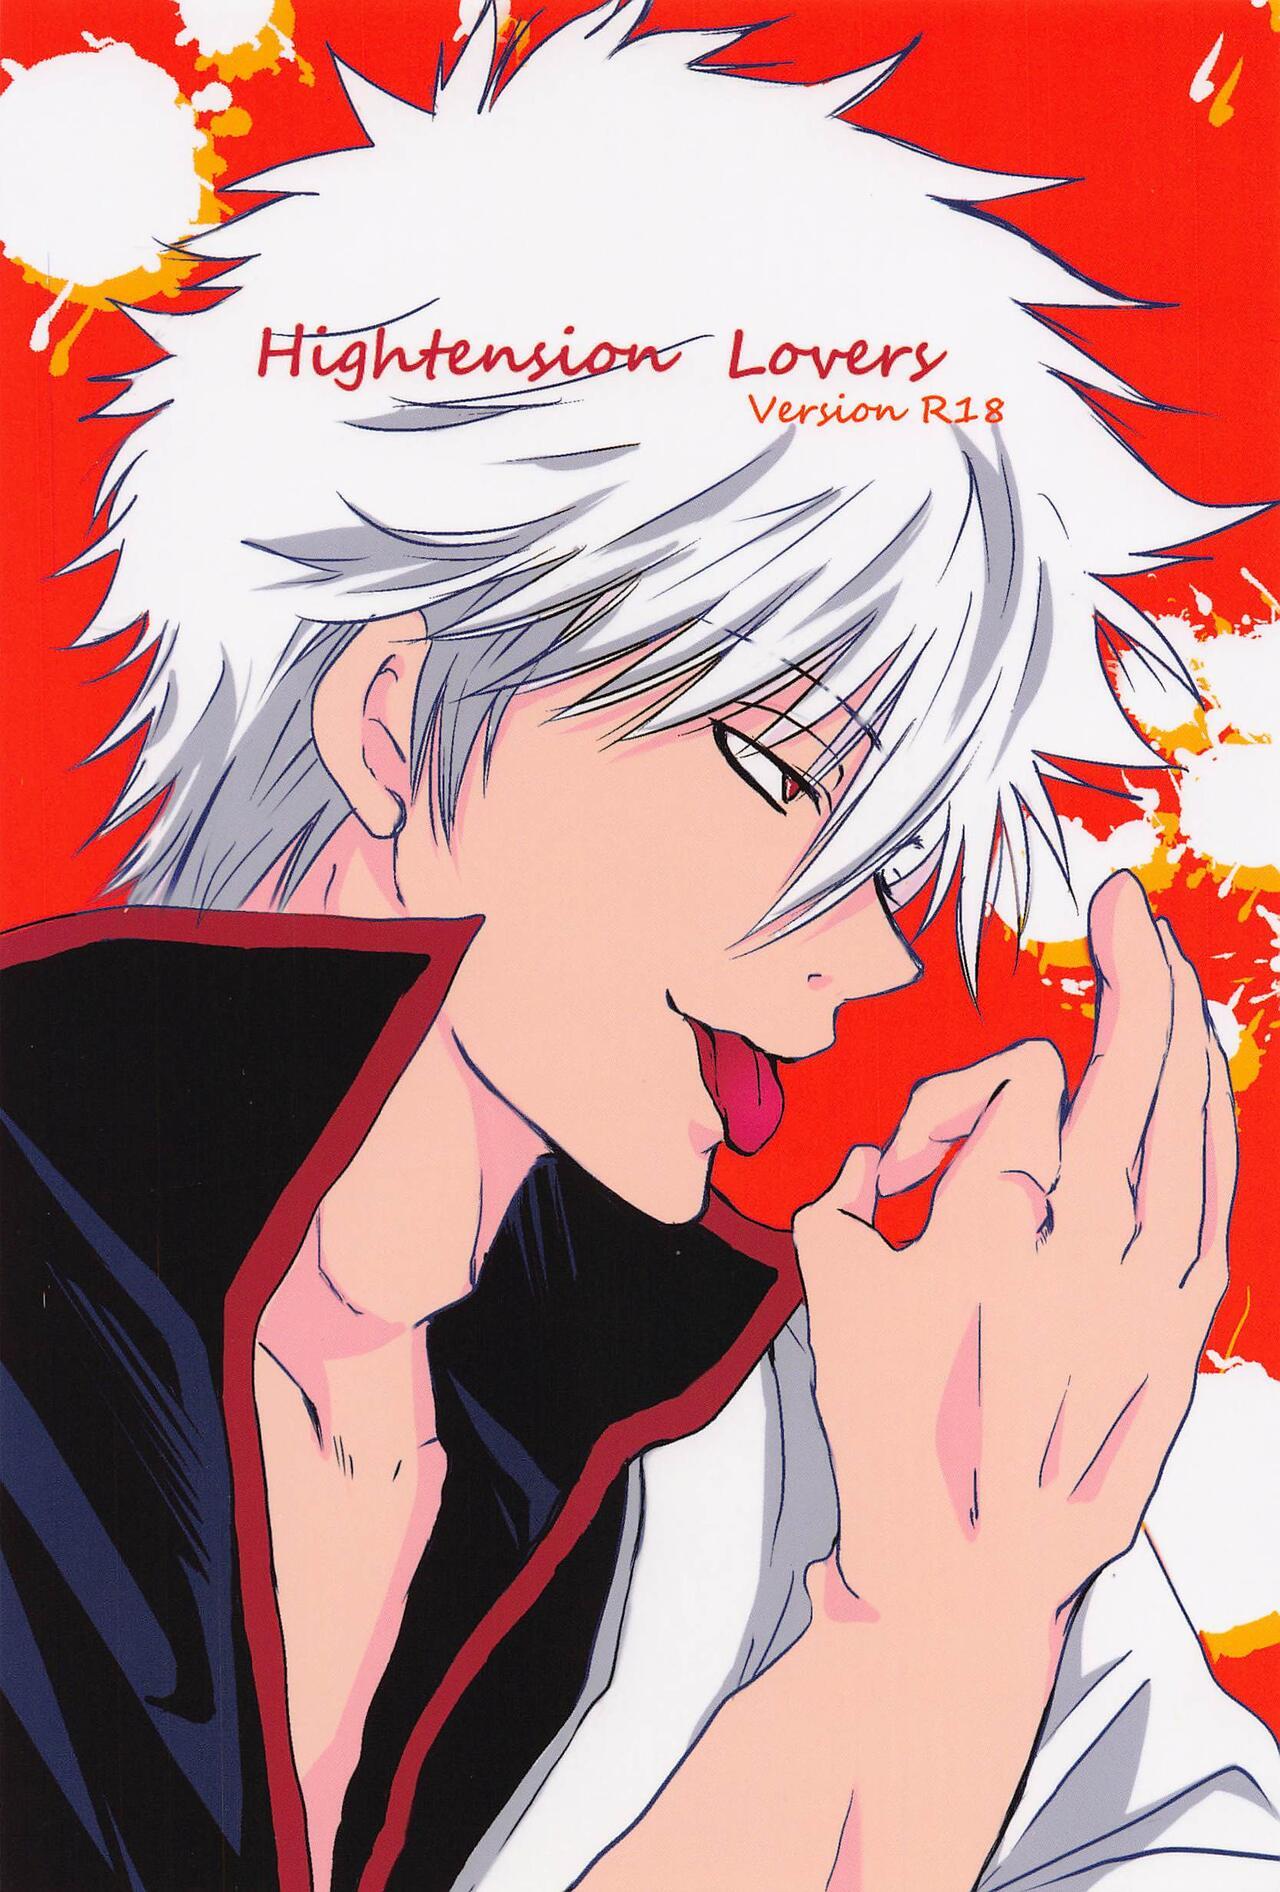 Hightension Lovers 0